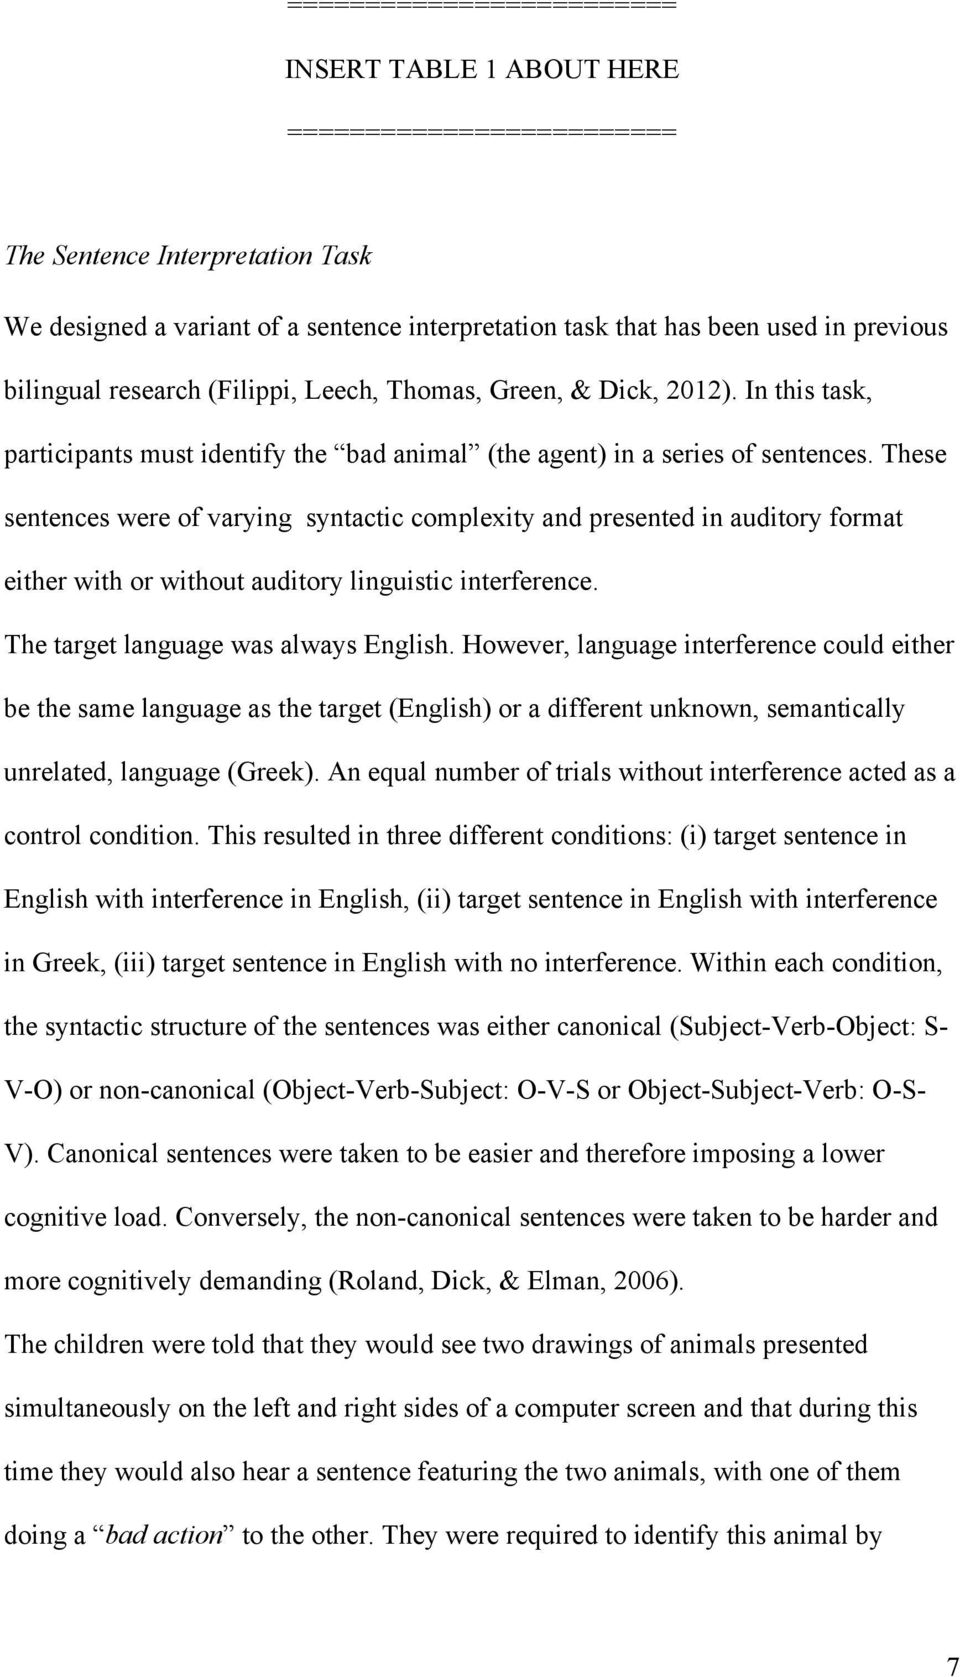 These sentences were of varying syntactic complexity and presented in auditory format either with or without auditory linguistic interference. The target language was always English.